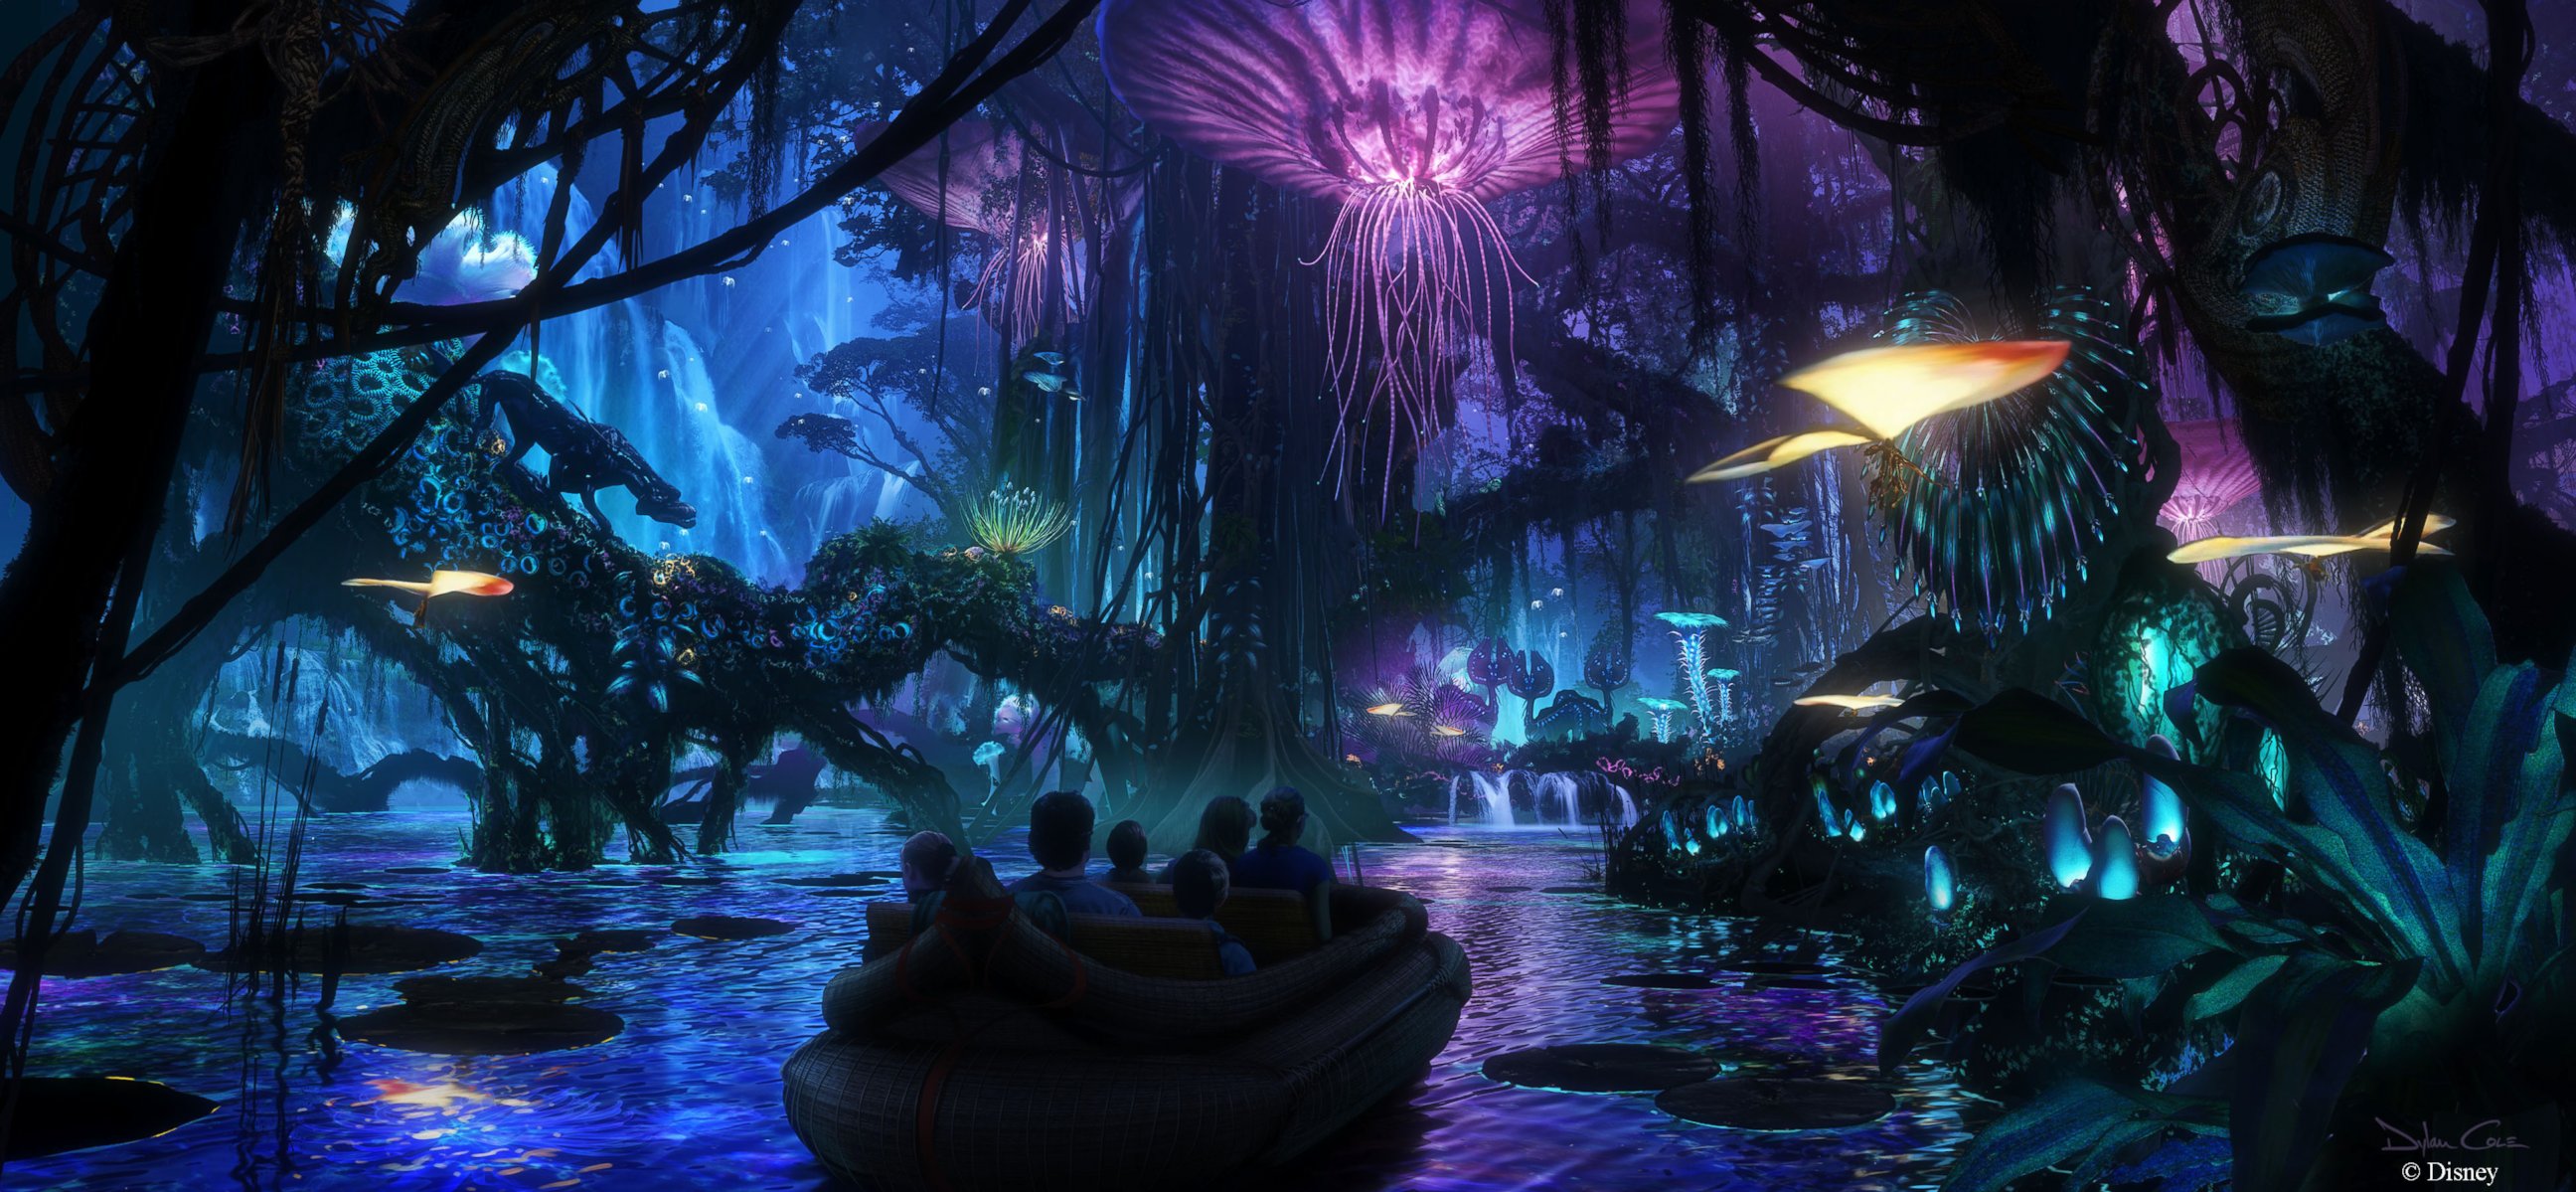 PHOTO: Rohde has overseen the development of Disney's "Avatar"-inspired land, seen in this illustration, which is scheduled to open at Animal Kingdom in 2017.